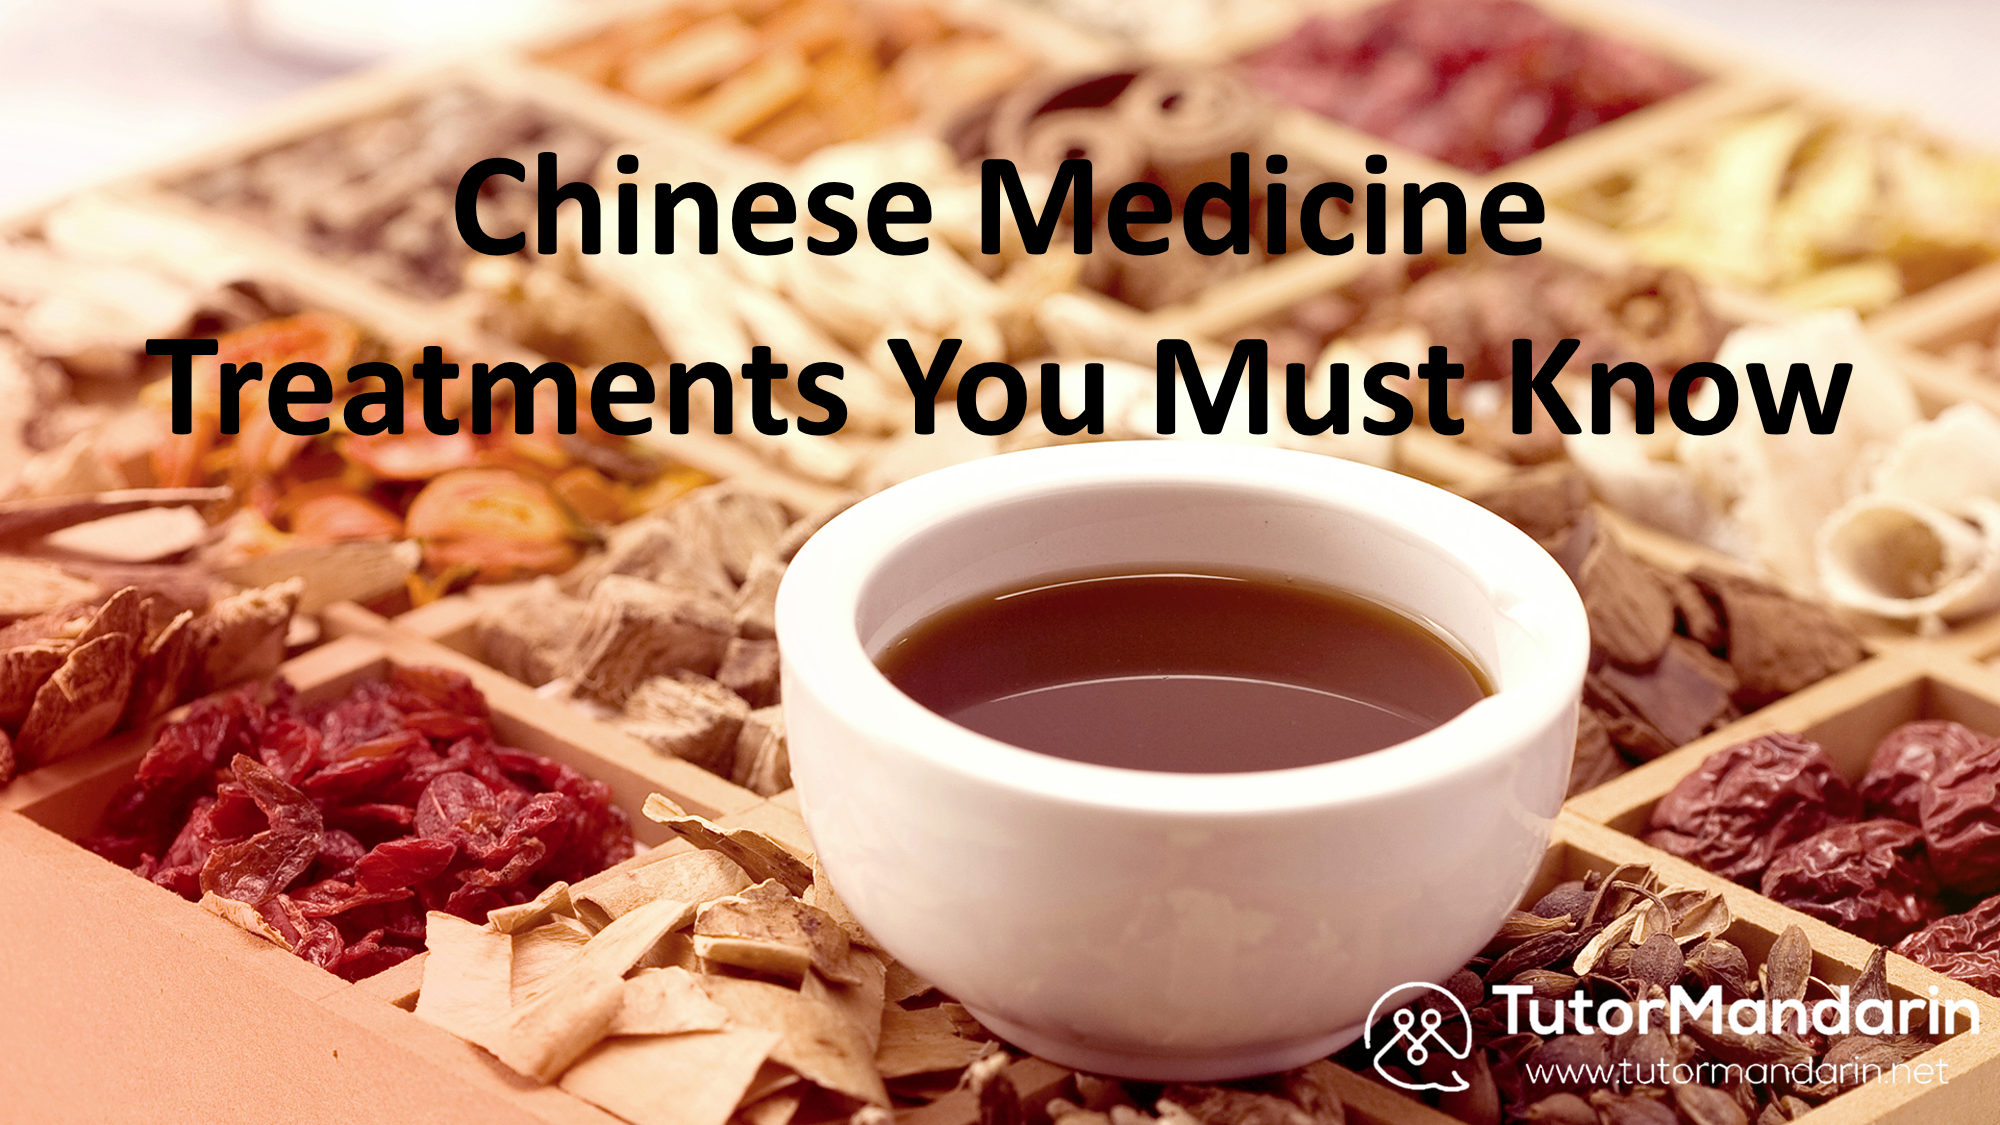 Herbal medicine is one of the main features in TCM